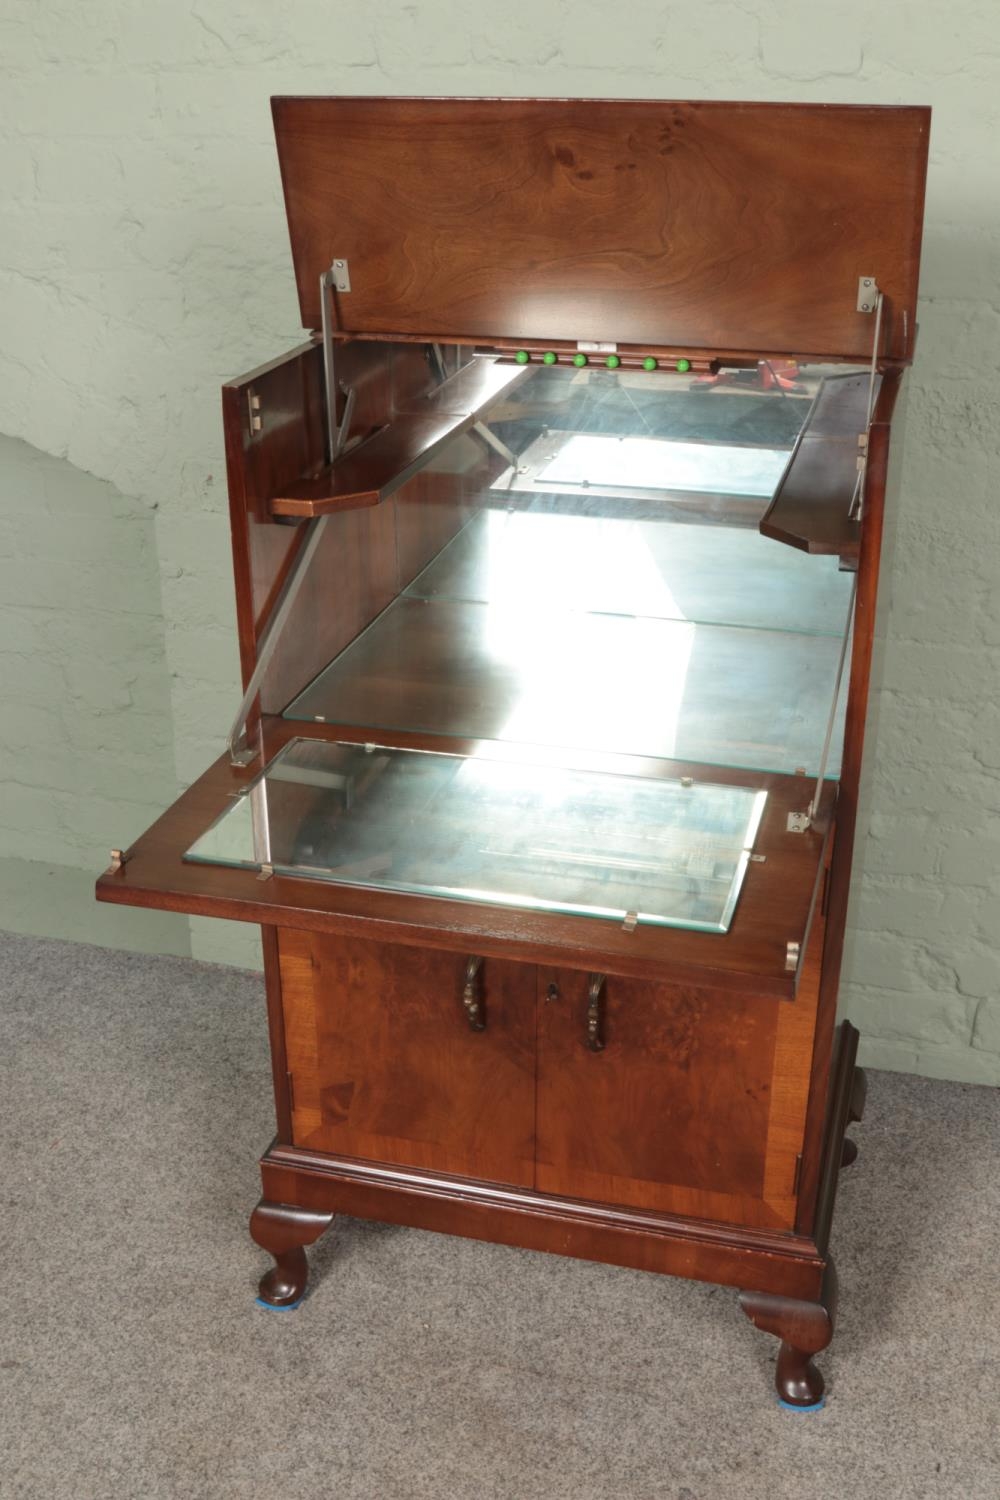 A vintage Cocktail cabinet with mirrored interior - Image 2 of 2